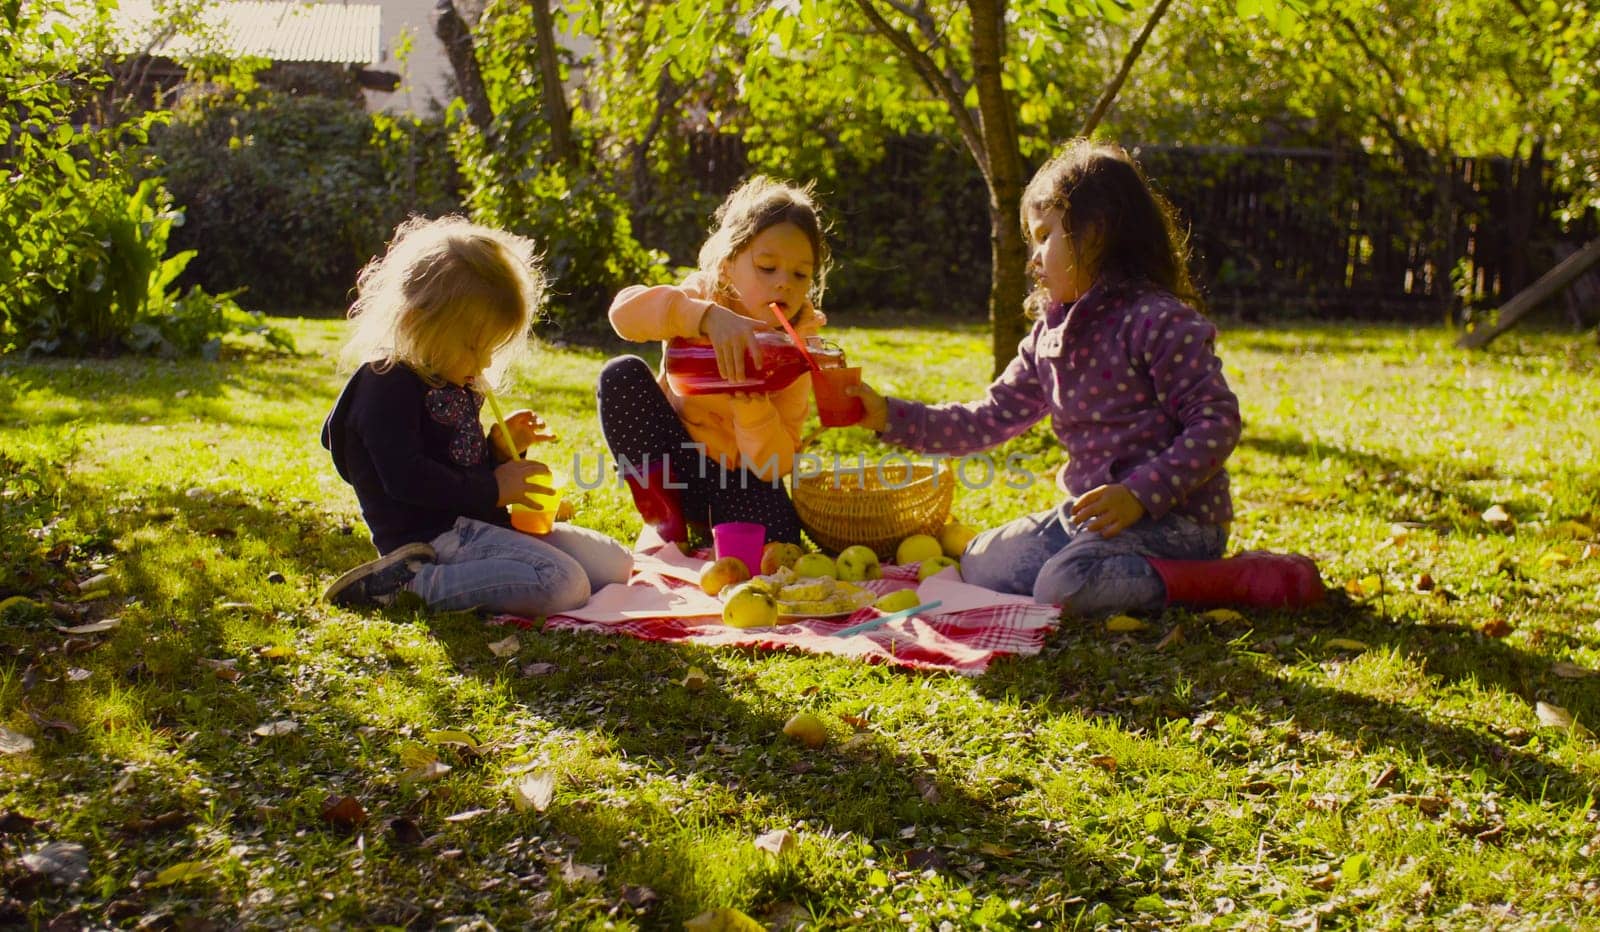 Autumn. Picnic in the garden. Children sitting on grass and drinking compote